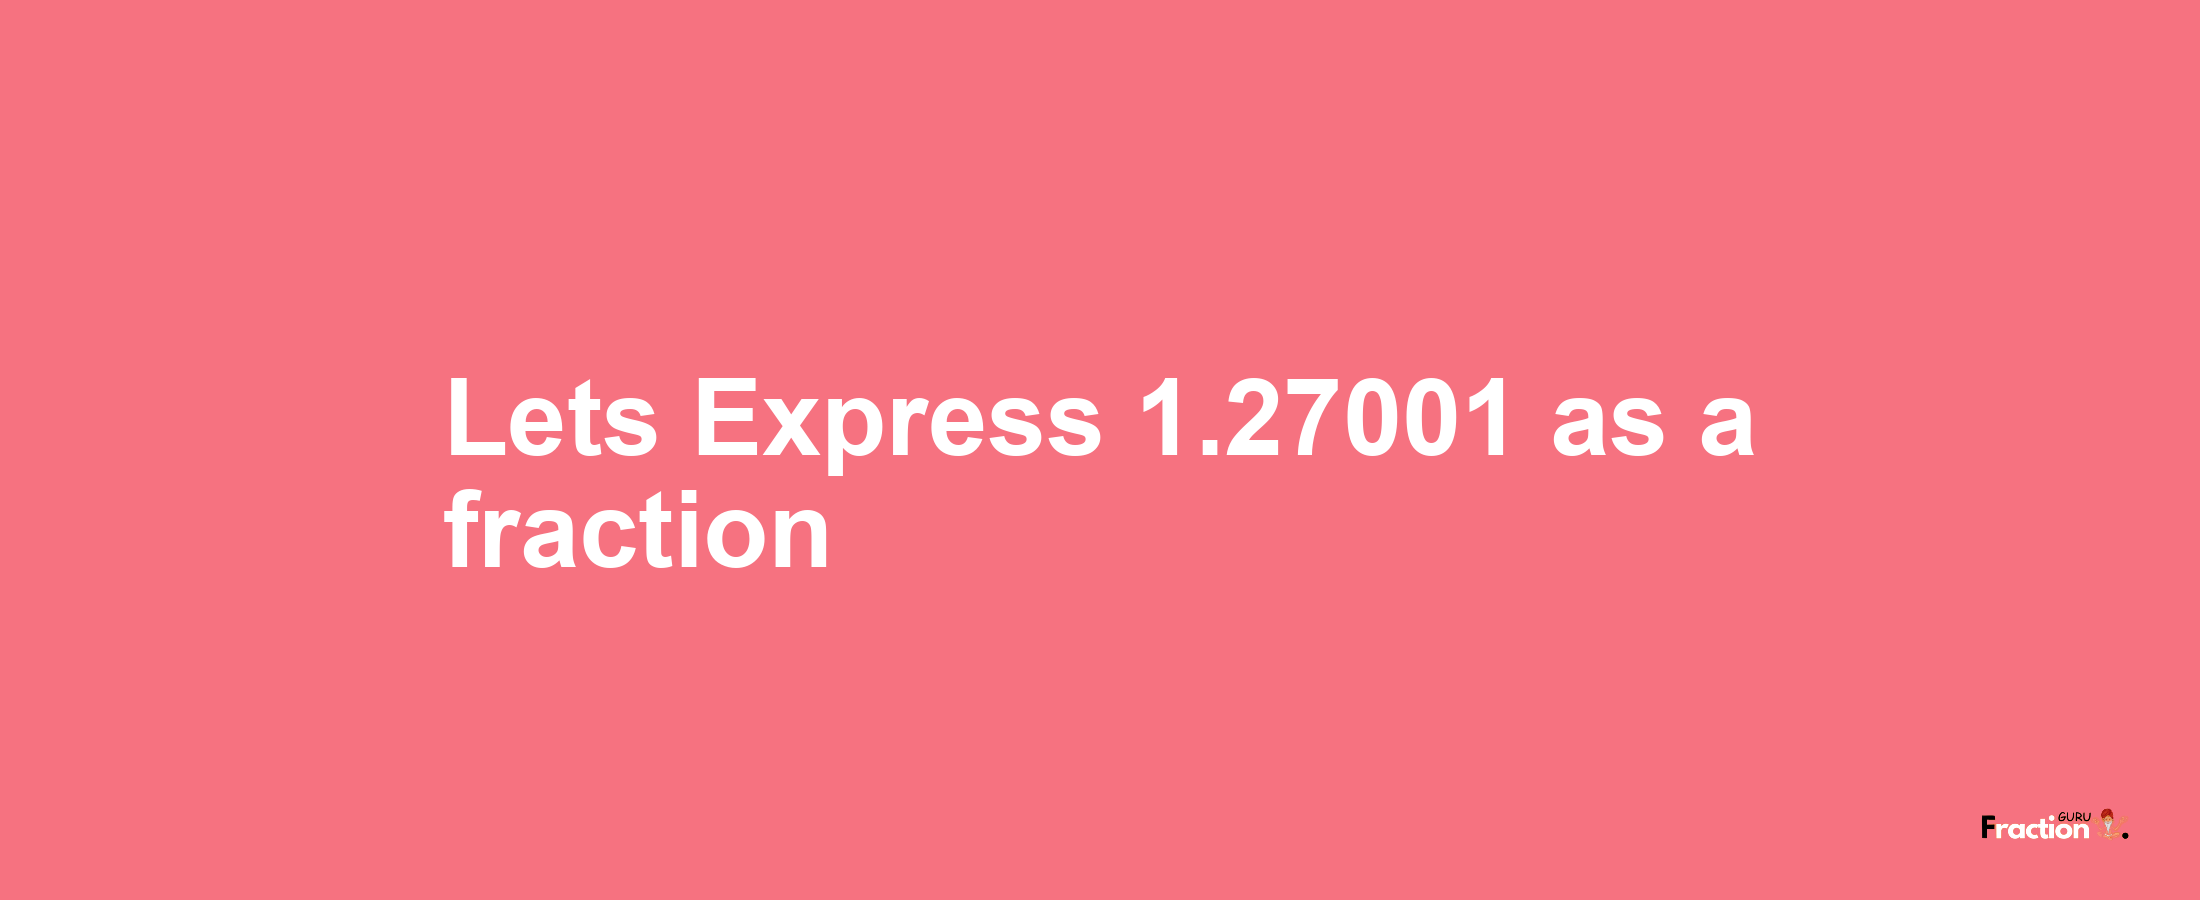 Lets Express 1.27001 as afraction